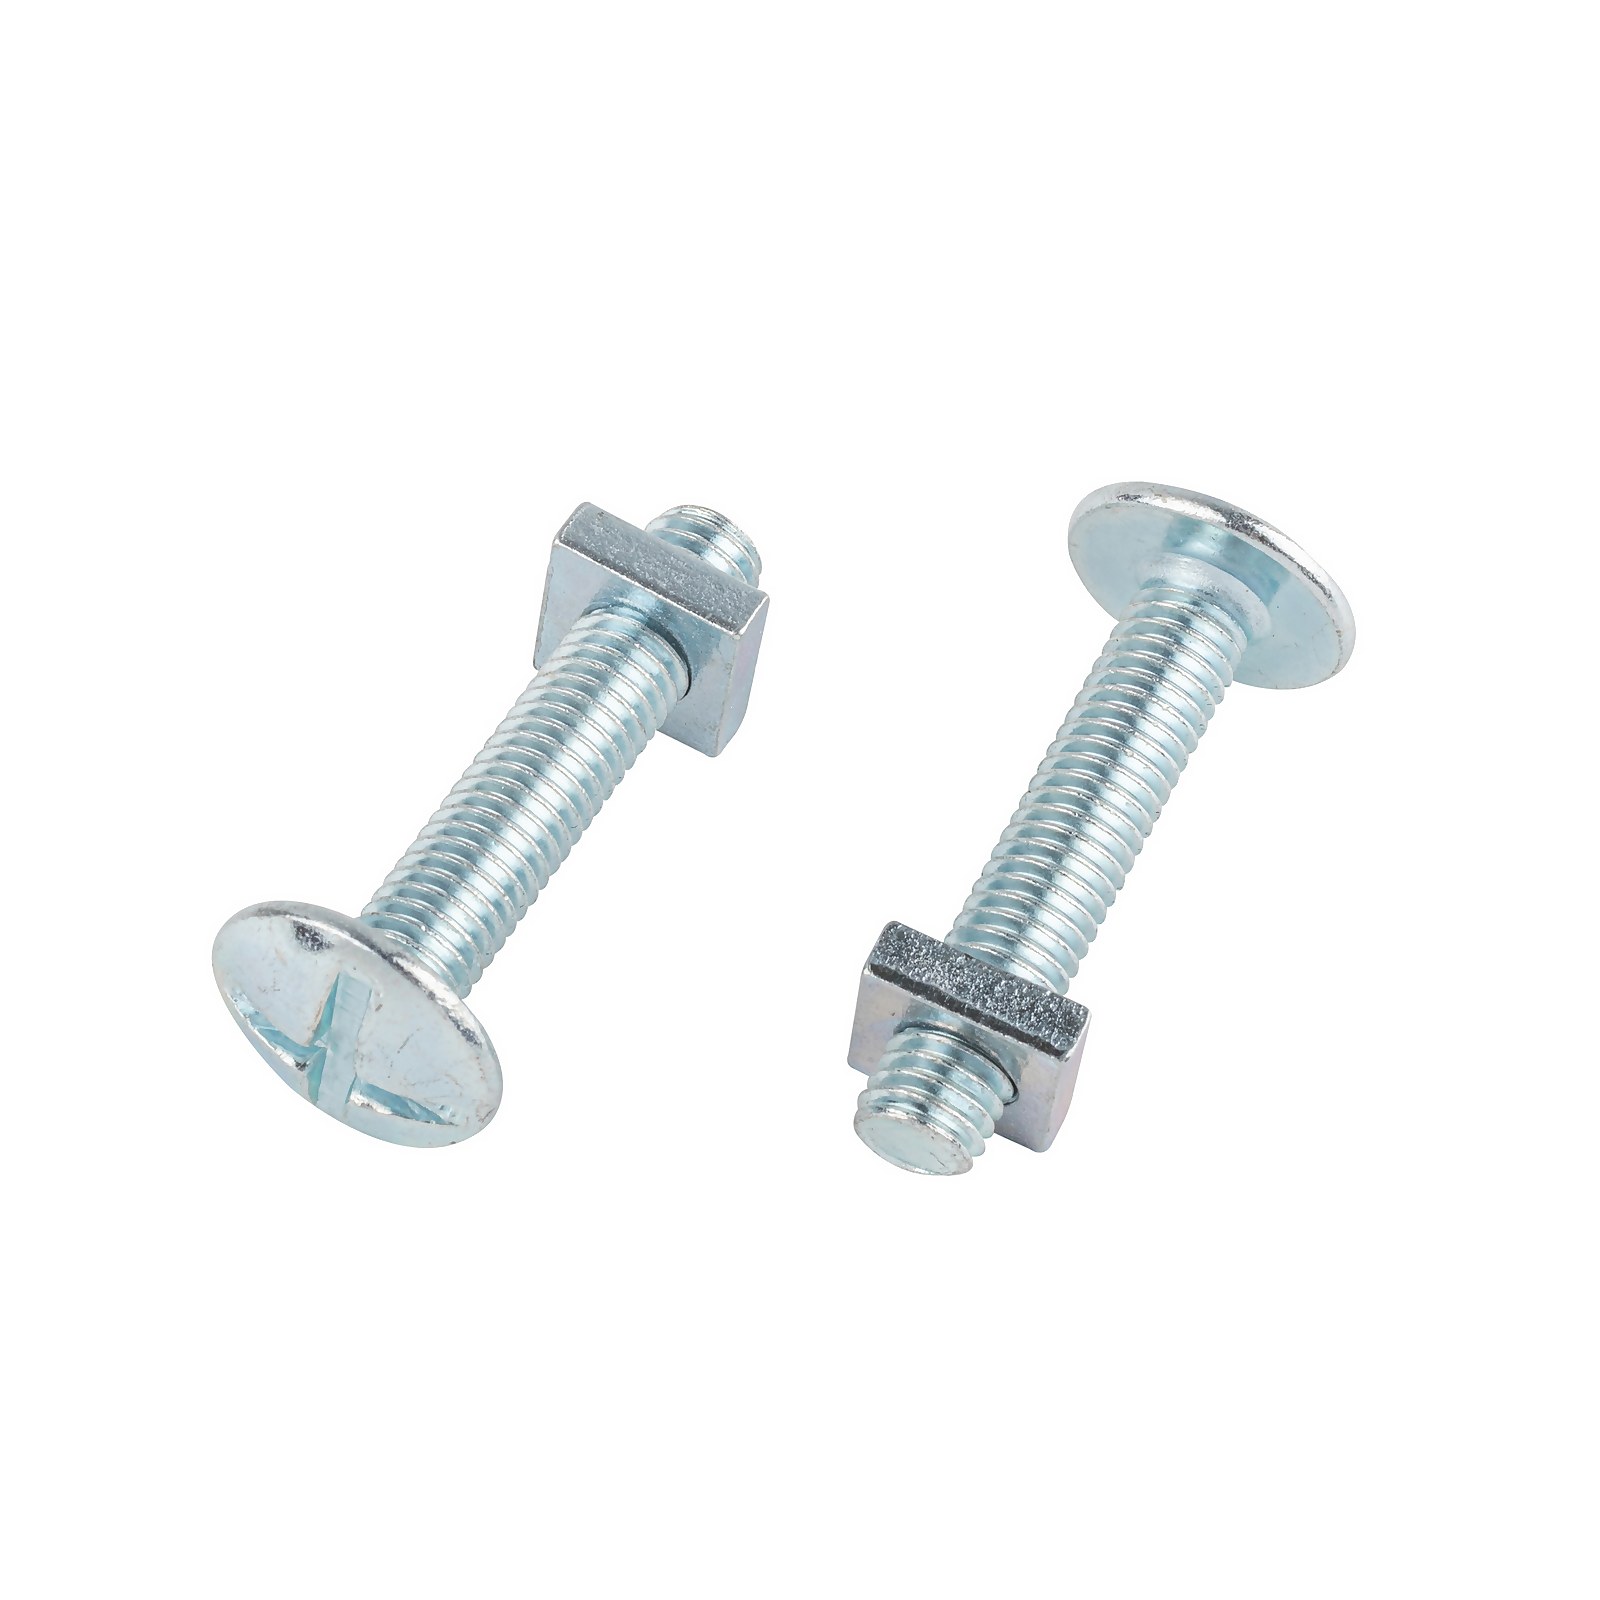 Photo of Homebase Zinc Plated Roof Bolt M6 40mm 10 Pack